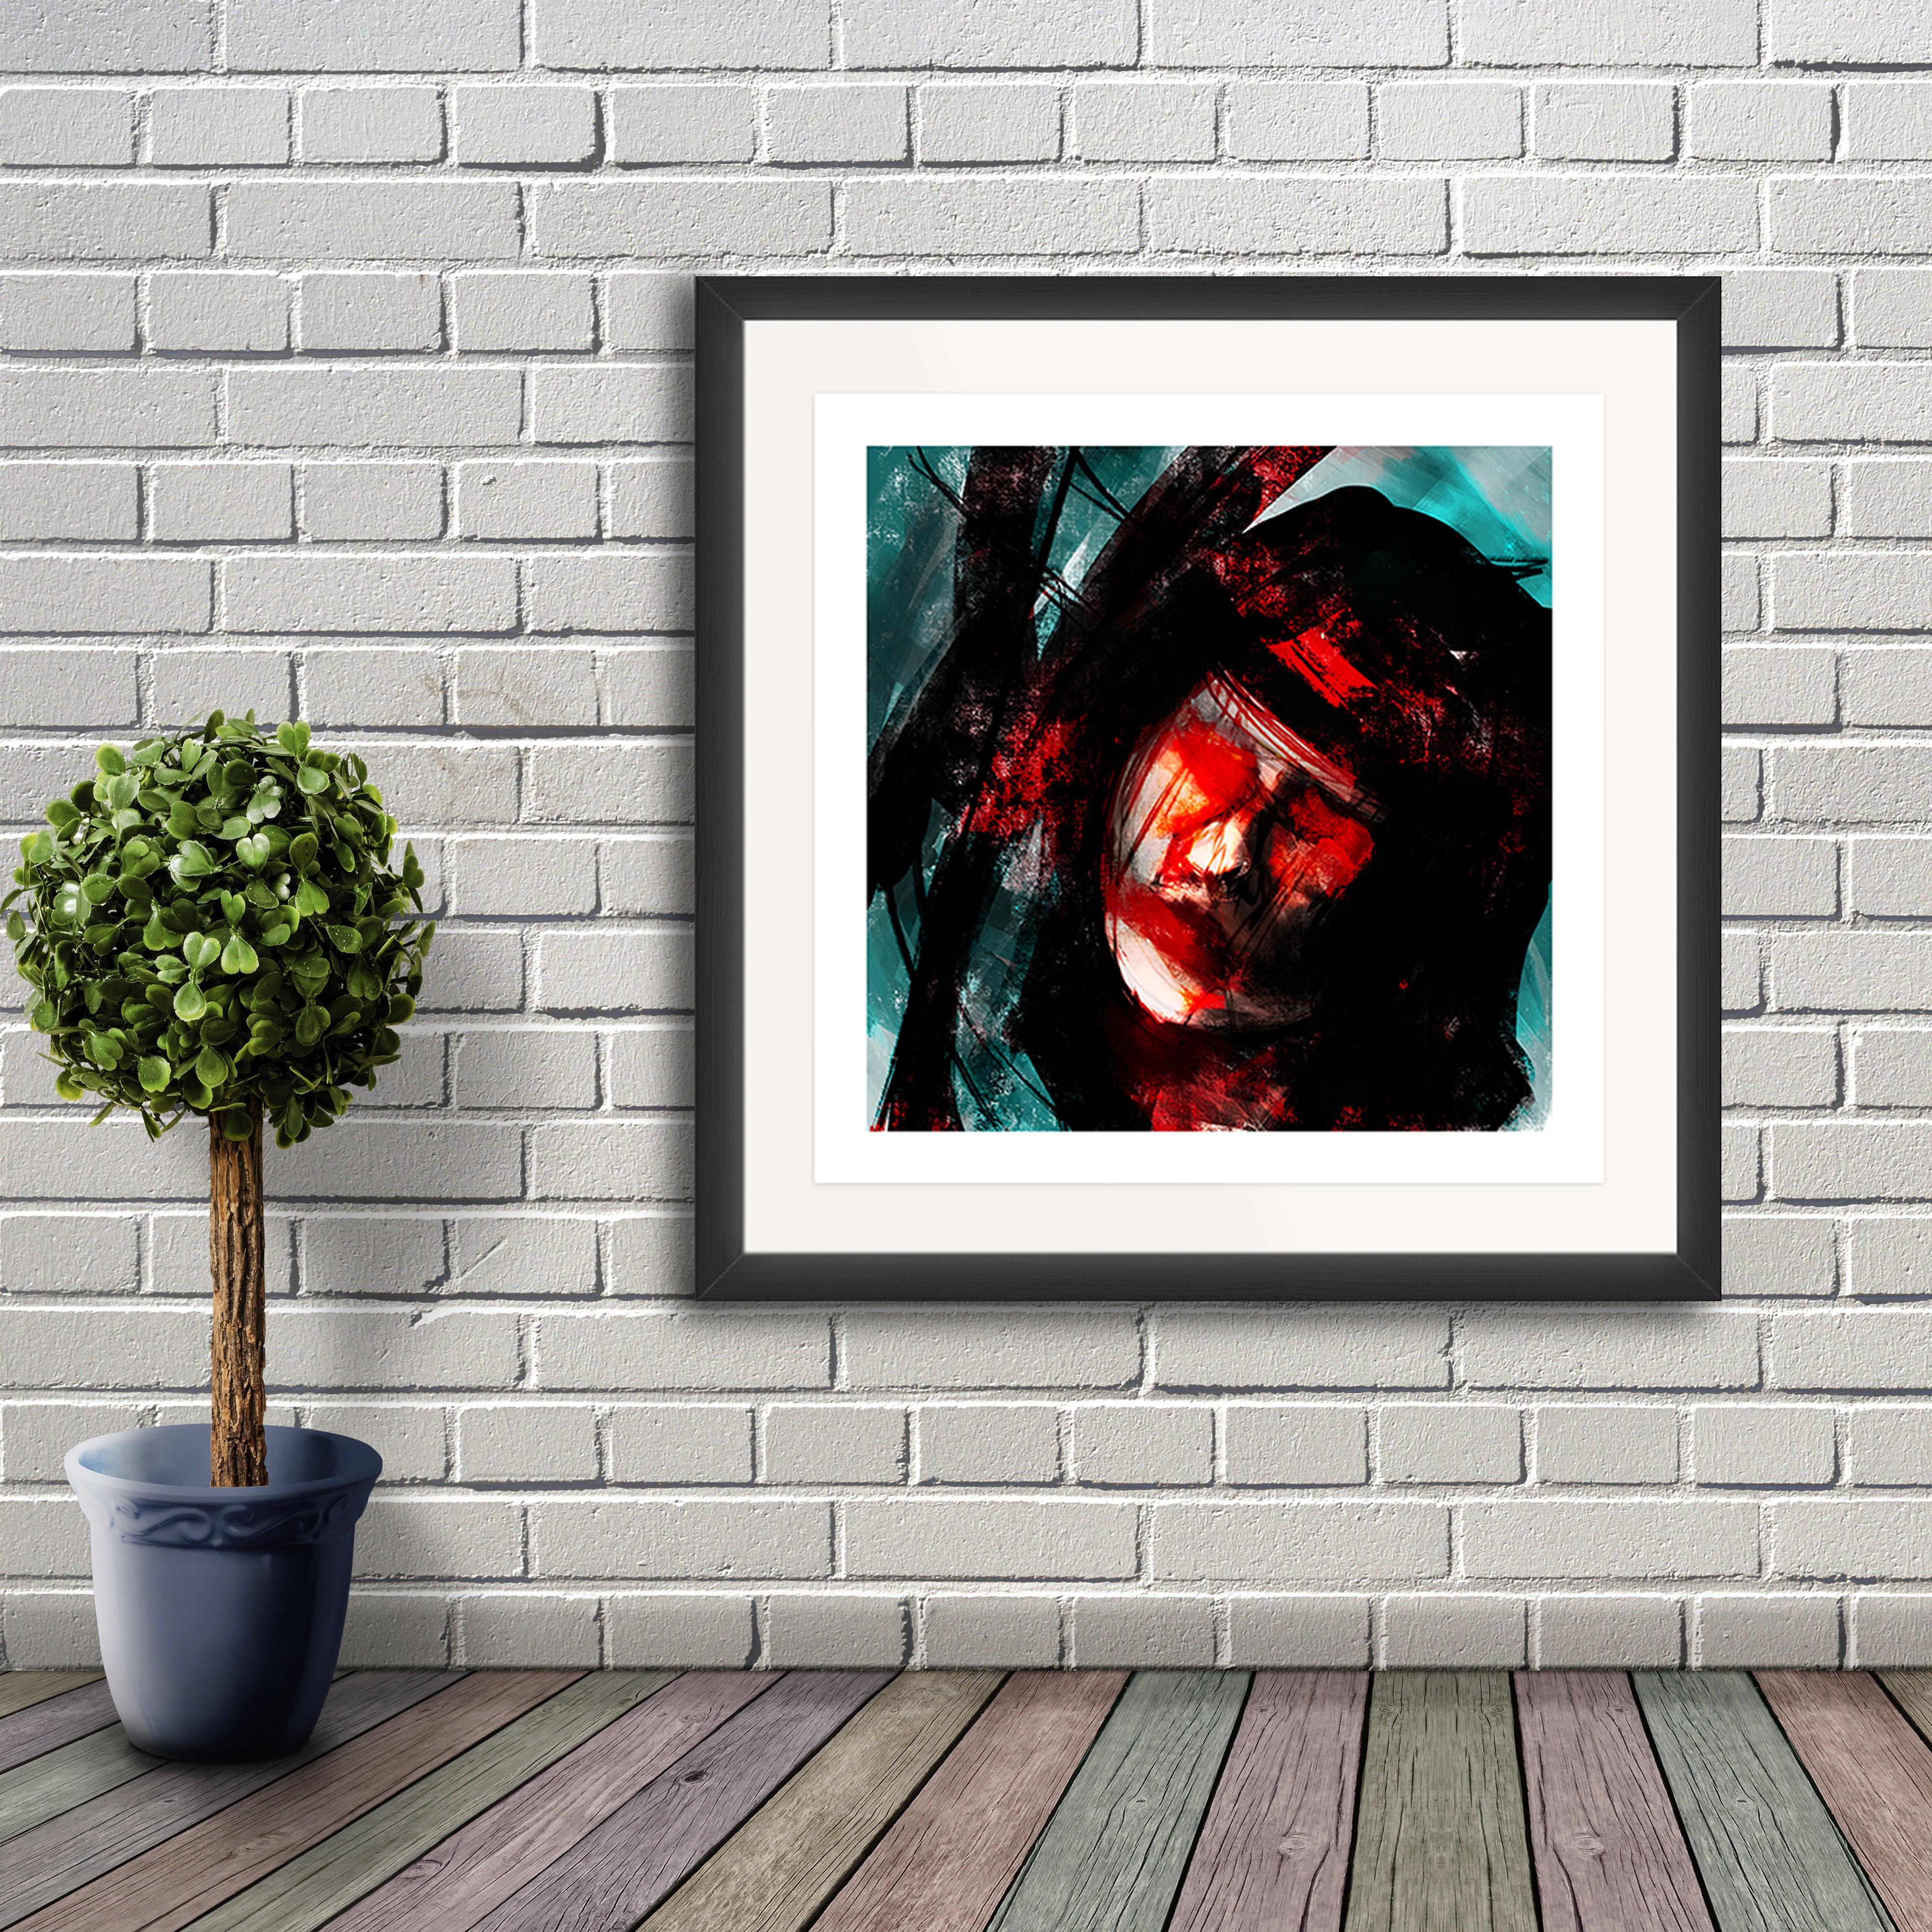 An abstract digital painting by Lily Bourne printed on eco fine art paper titled Tuned showing a female face amongst turquoise, black and red lines. Artwork shown in a black frame hanging on a brick wall.